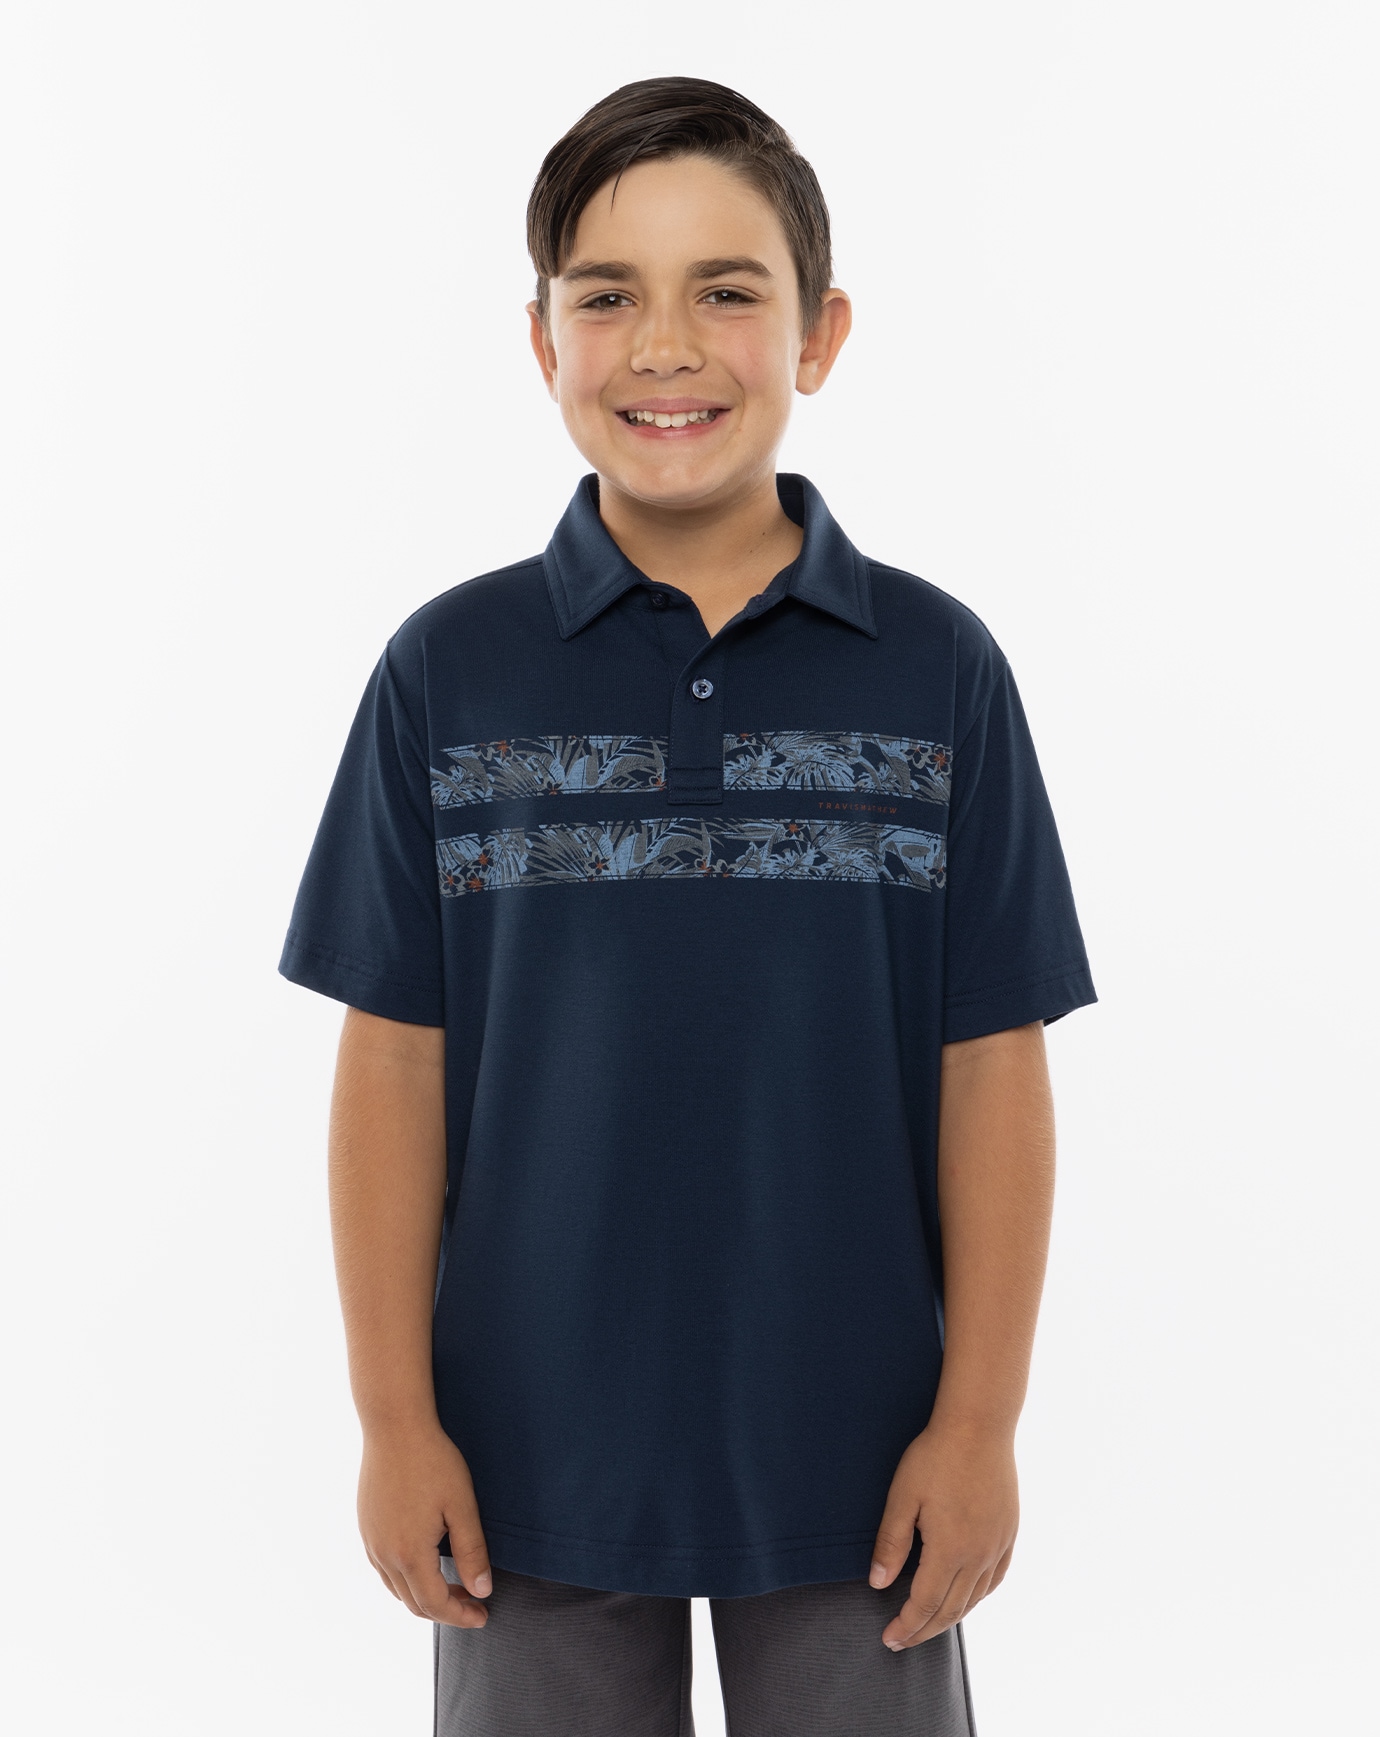 Related Product - PIER RUNNER YOUTH POLO